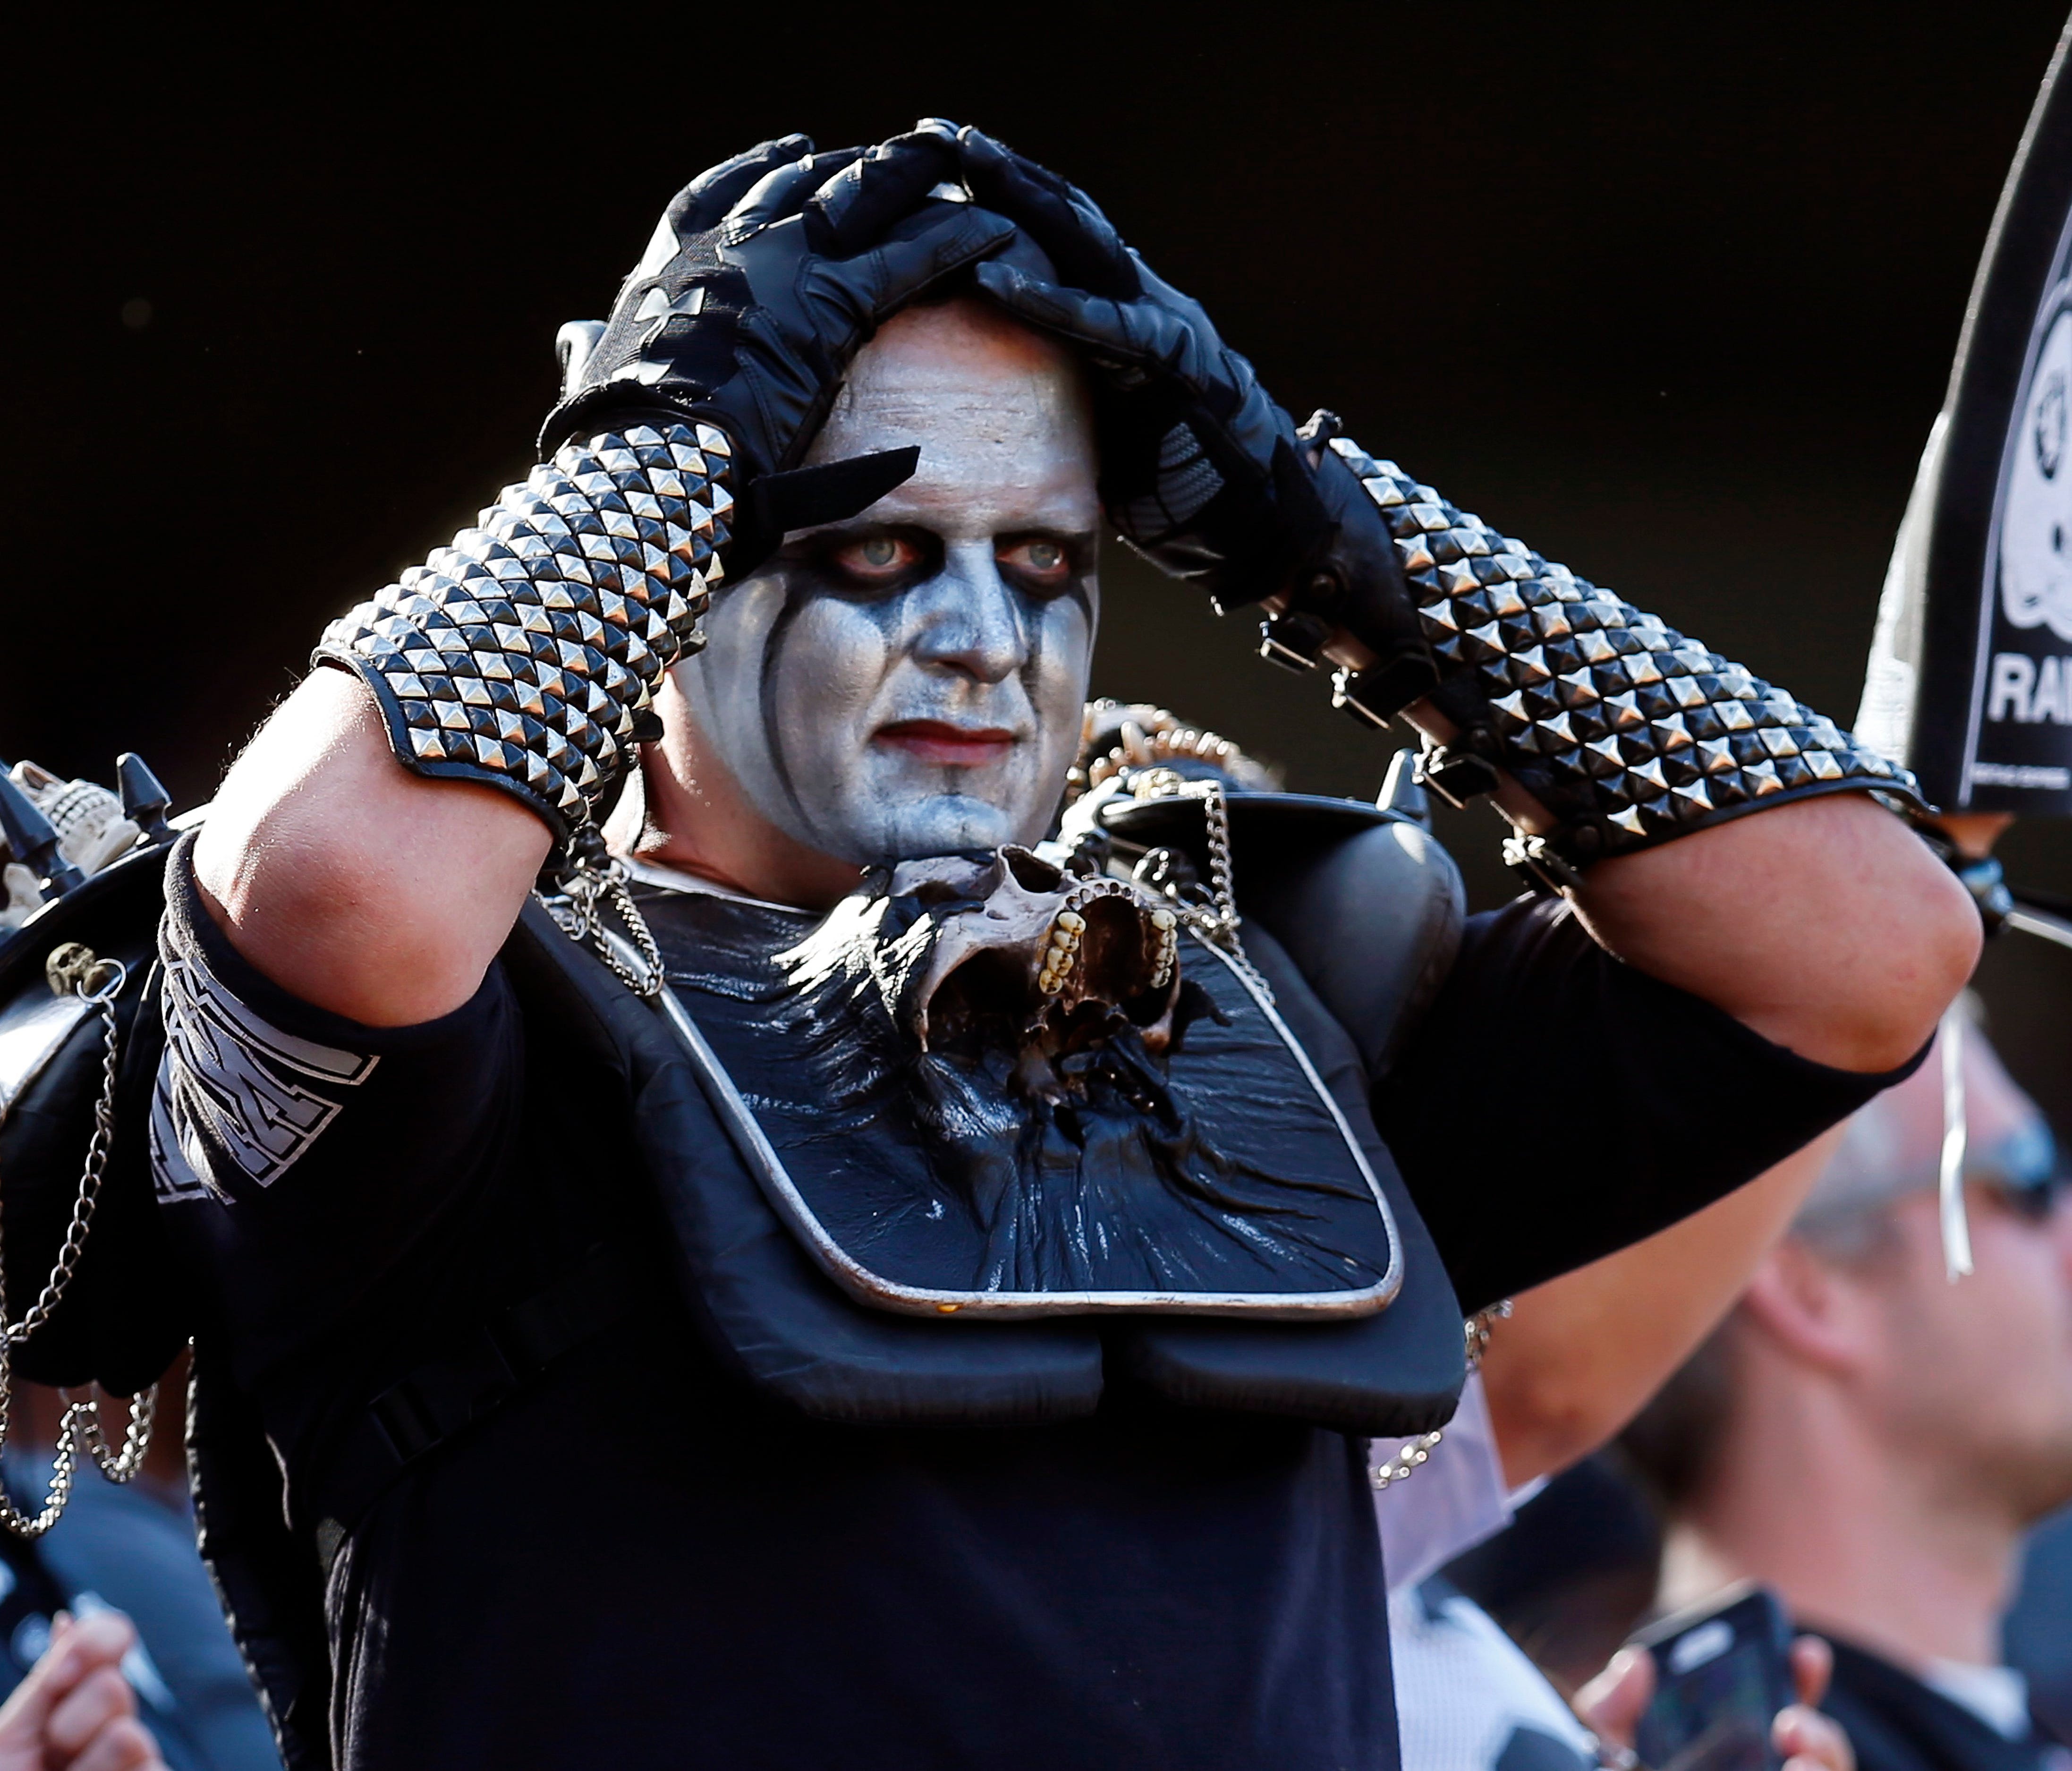 Raiders fans in Oakland have now lost their team twice to relocation.